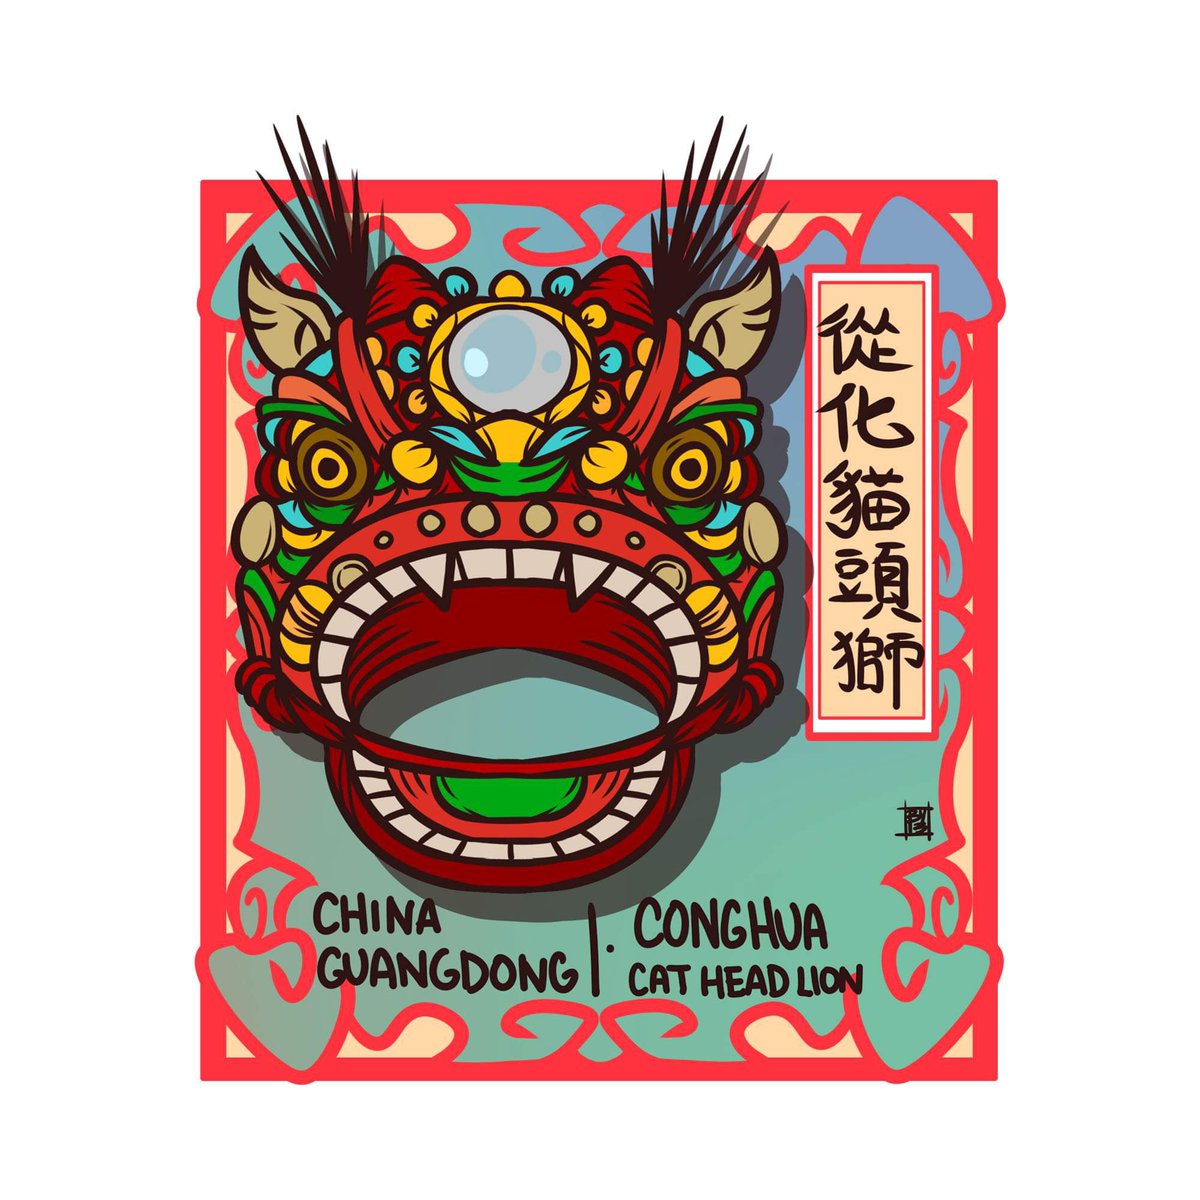 Traditional Dances -32
Chinese-Conghua District- Guangzhou City -Guangdong Province -Conghua cat-headed lion- #從化貓頭獅

#art #doodle #drawing #liondance #舞獅 #chineseliondance #traditional